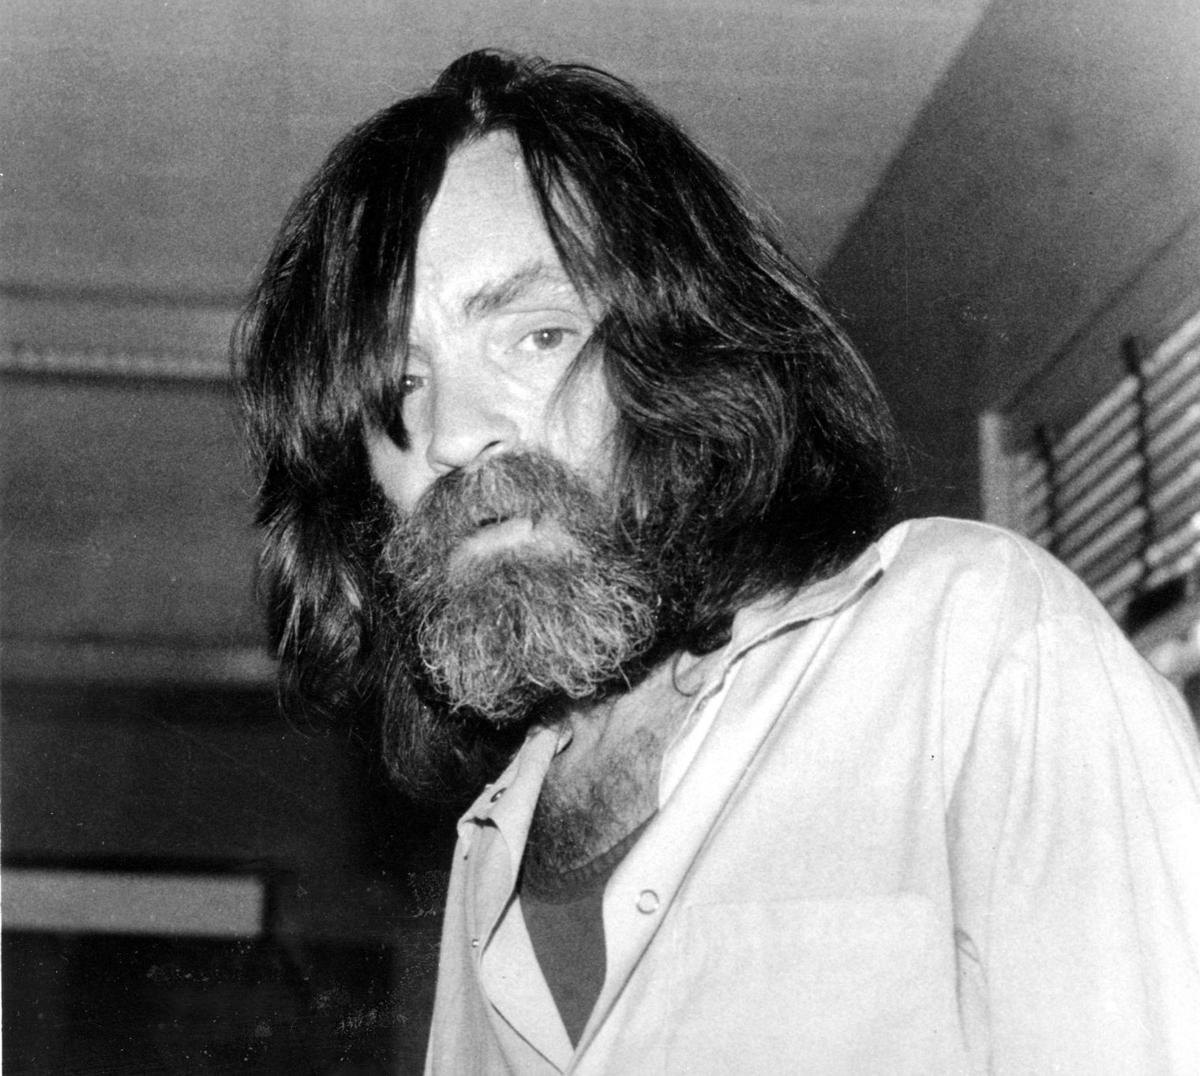 Charles Manson Whose Cult Slayings Horrified World Dies At 83 